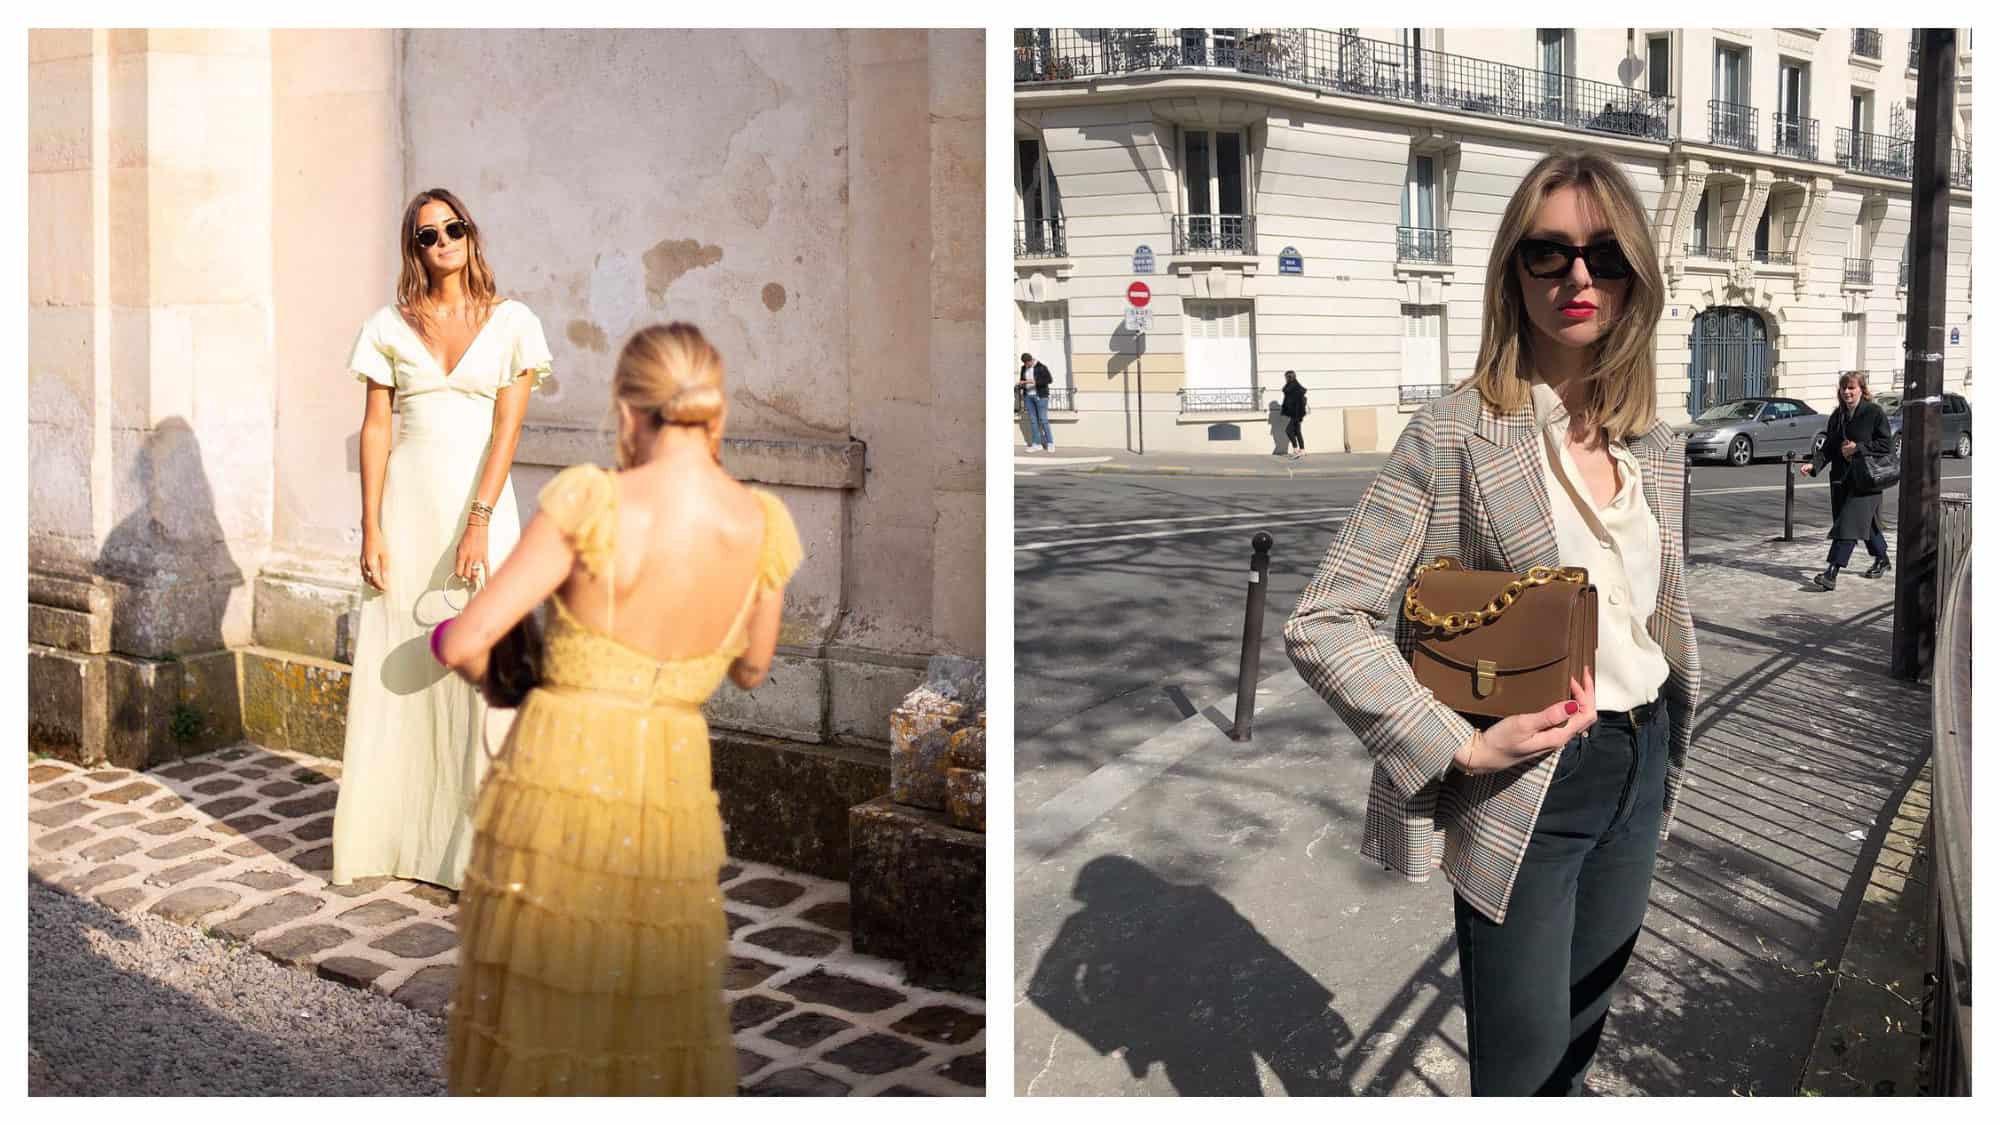 Margot Rousseau, fashion editor at Glamour magazine in Paris, taking a picture of Emma Ratajkowski (left). Paris Instagram fashion influencer Lucie Mahé holding a brown handbag posing in a Paris street (right).